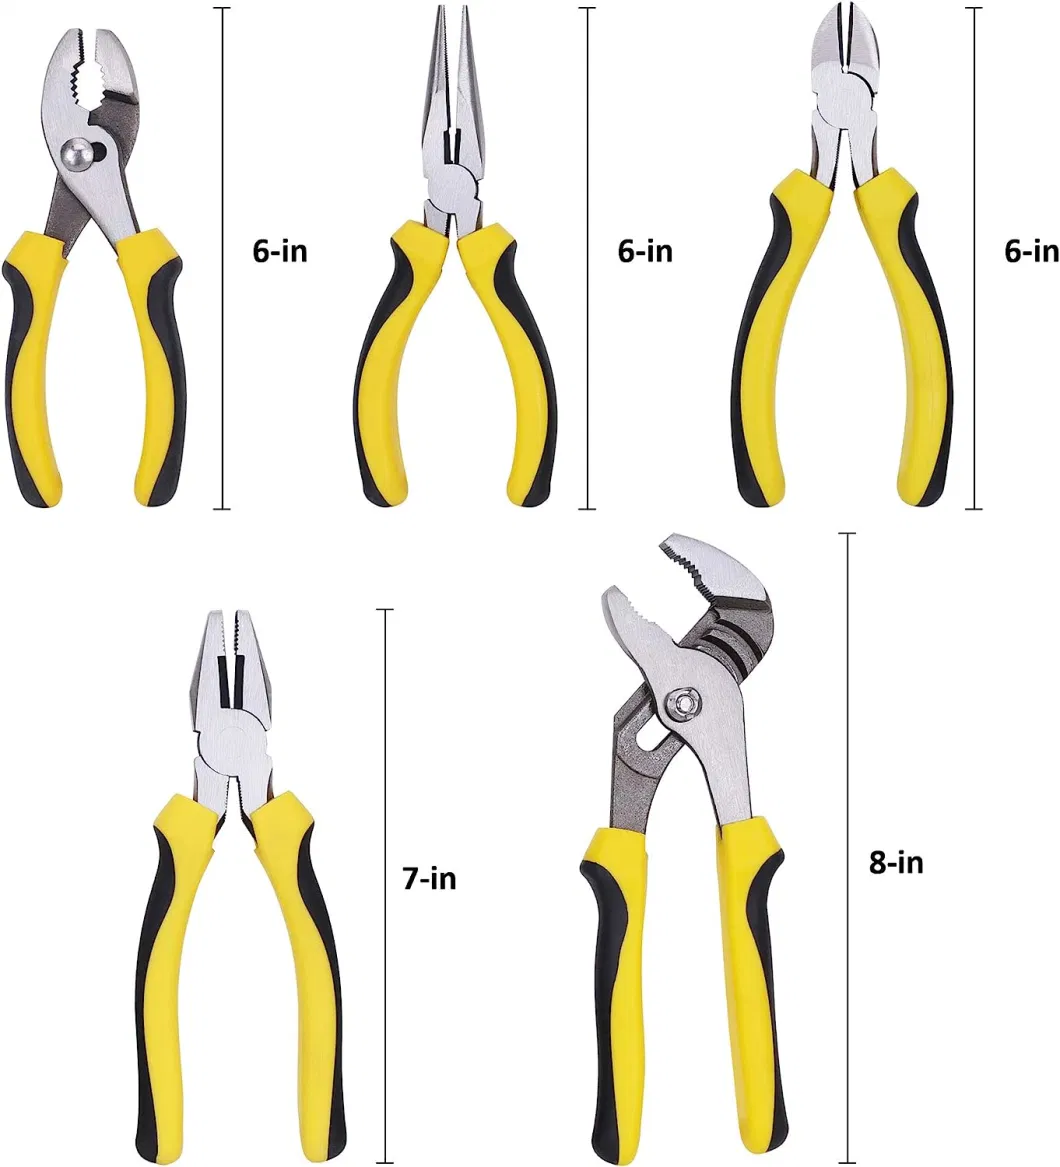 Professional Hand Tools 5-Piece Pliers Set with Sharp Blades &amp; Non-Skid Handles for Tradesman, Artisans, Diyers